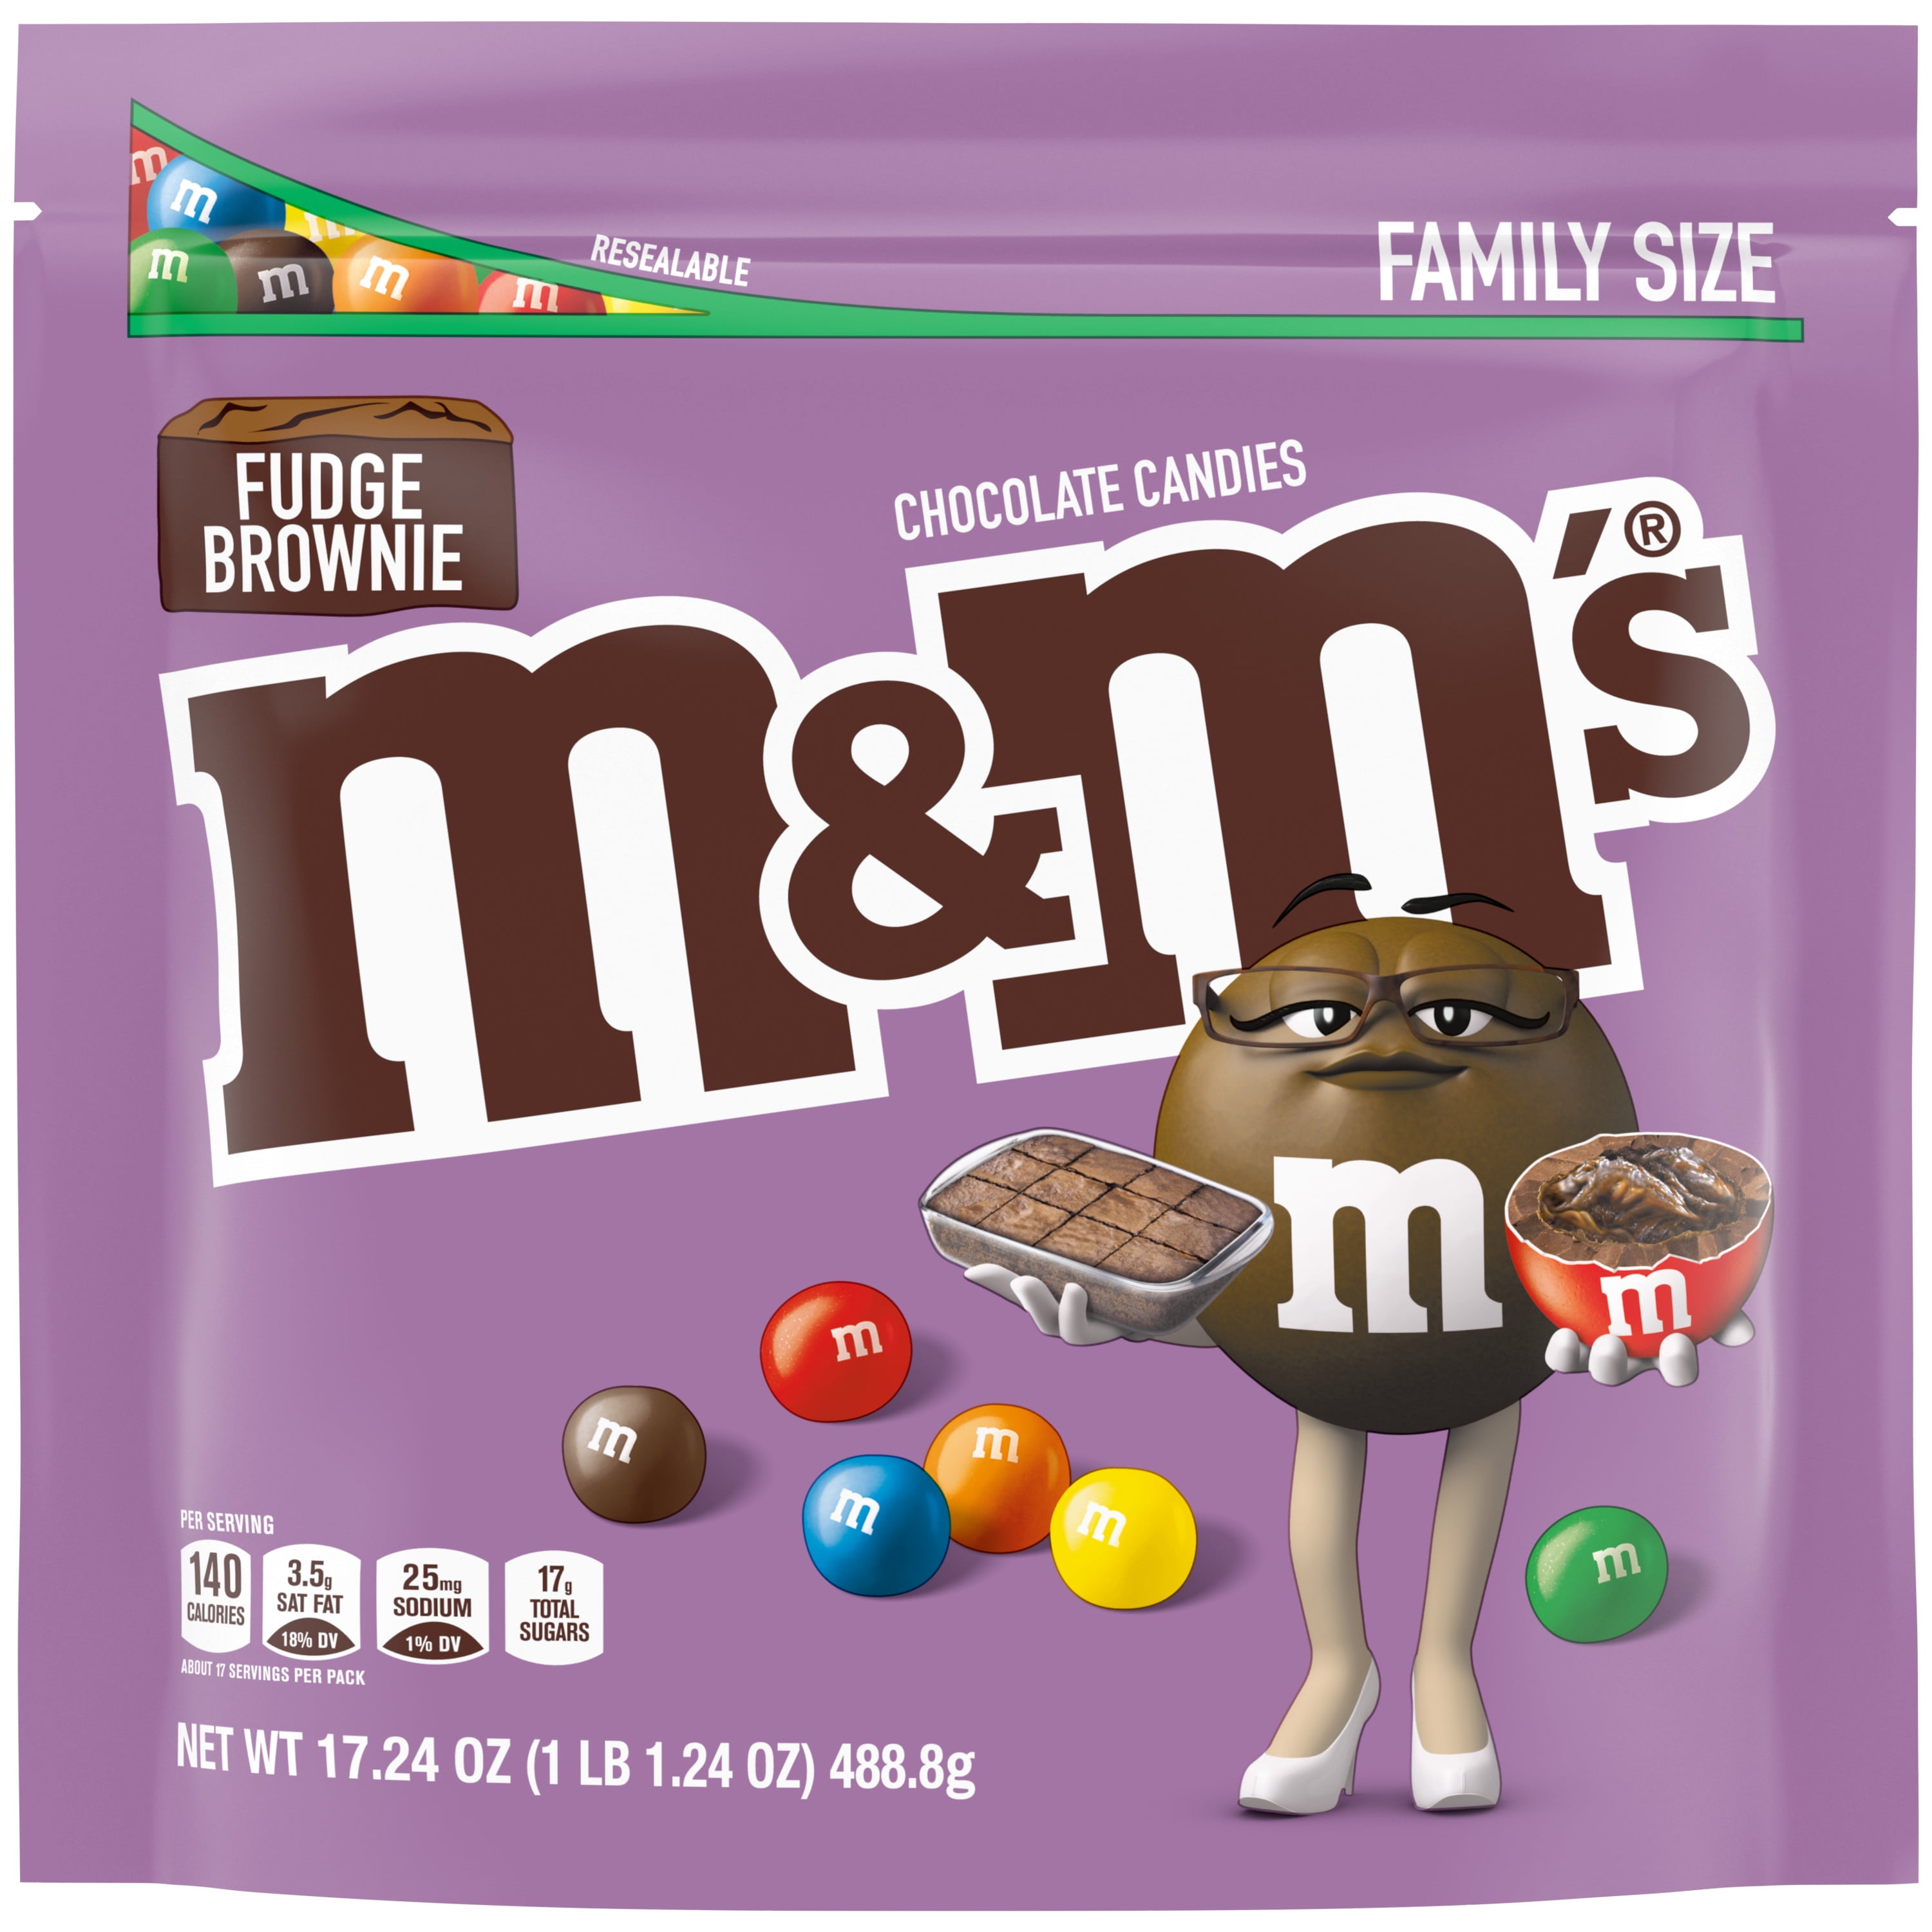 M&M's Fudge Brownie Sharing Size Chocolate Candy, 9.05 oz. Stand Up Bag (Pack of 8)